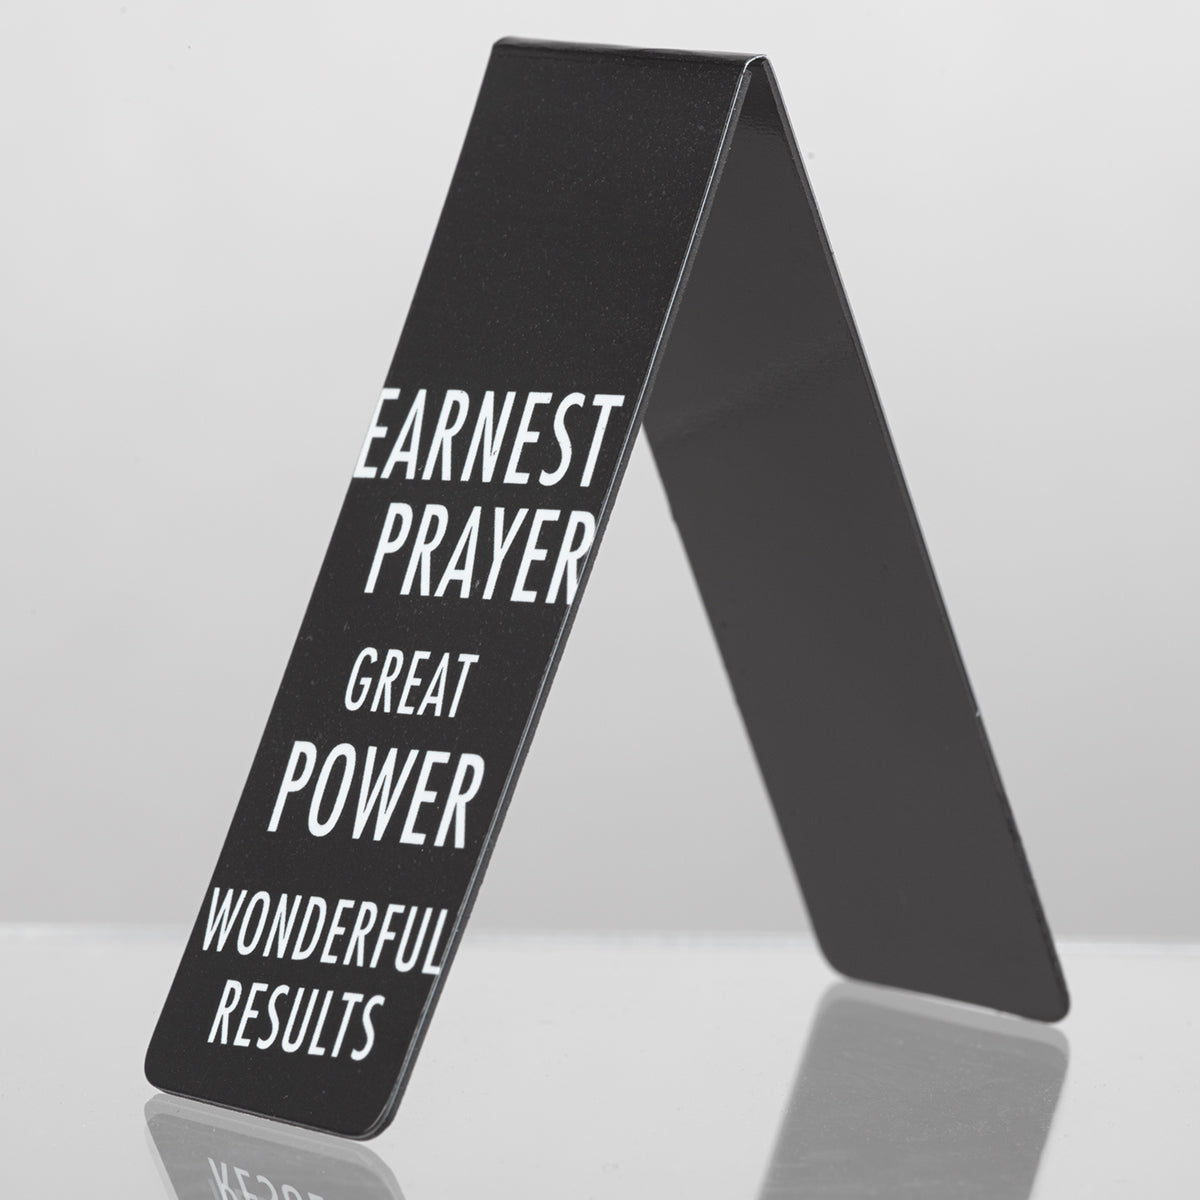 Black and White Magnetic Bookmarks - The Christian Gift Company